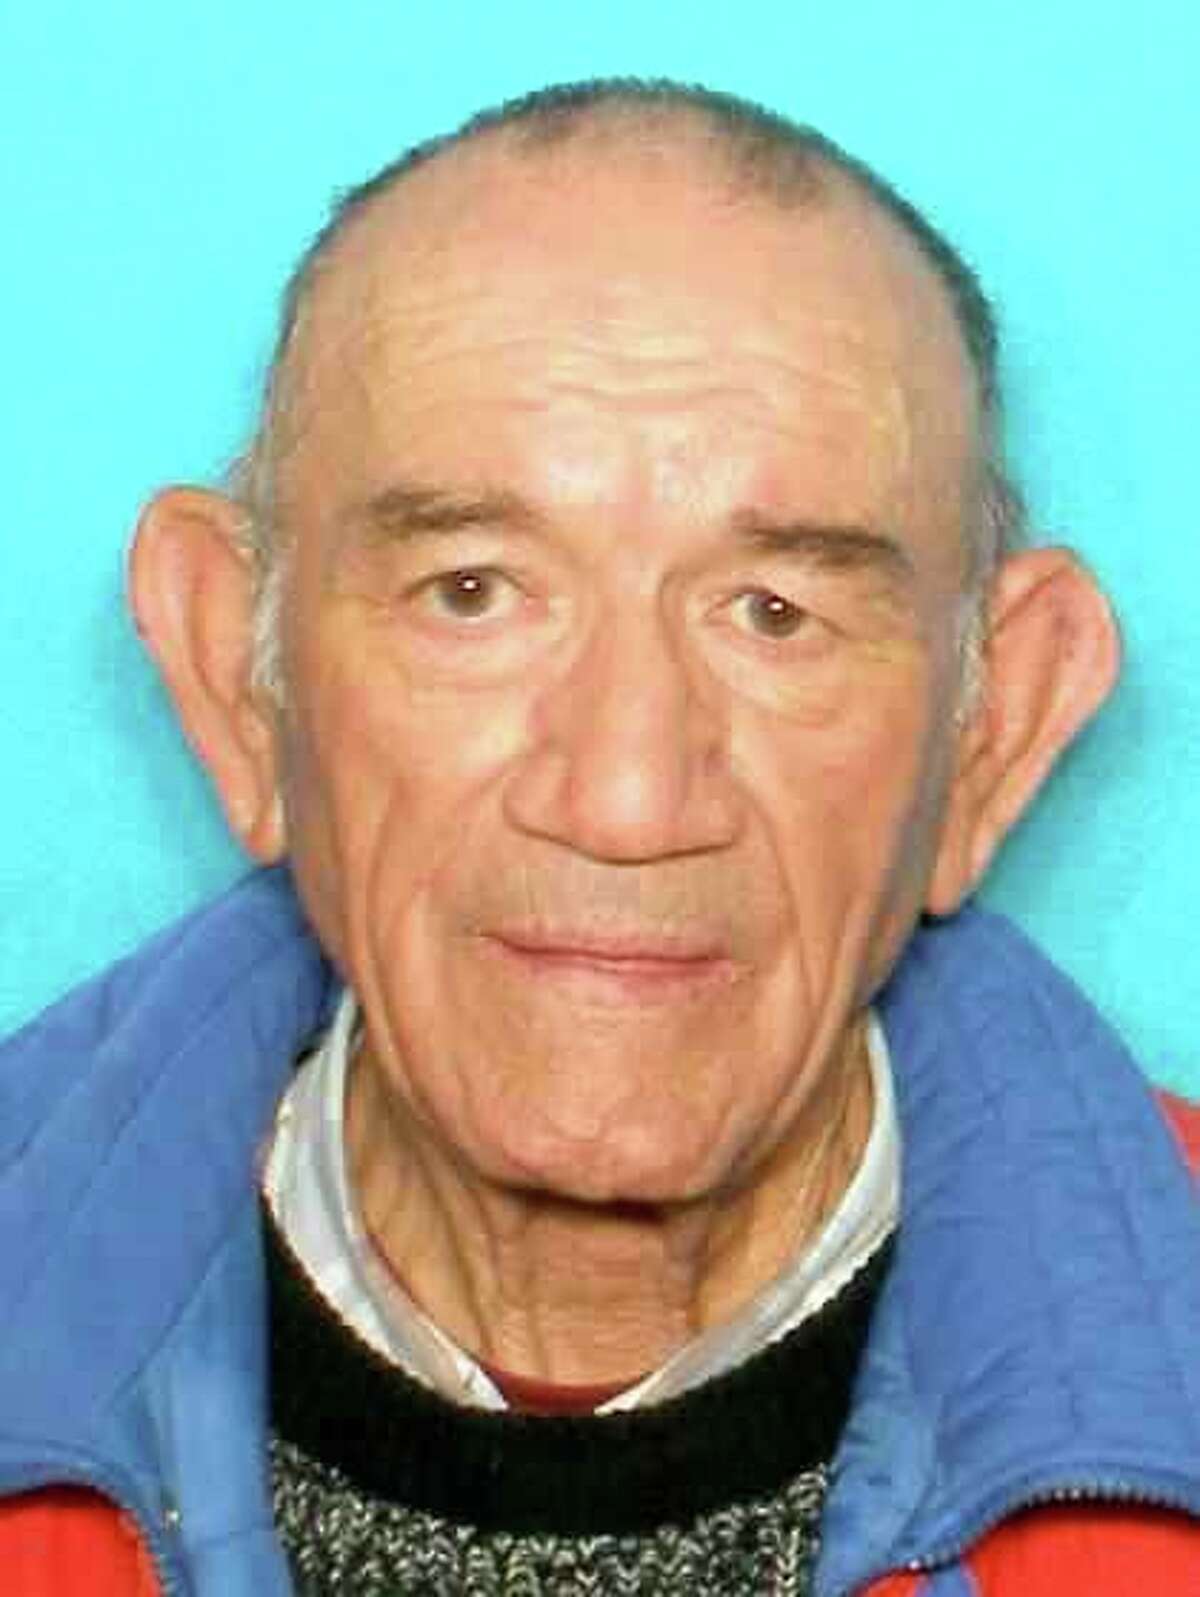 William Nuthall was last seen earlier this morning around 9:30 a.m. near the corner of St. James Place and Kentucky Avenue off Dobbin Huffsmith Road. Surveillance video shows him walking into some woods near that intersection. Anyone with information is urged to contact the Montgomery County SheriffÂ?’s Office at 936-760-5800.